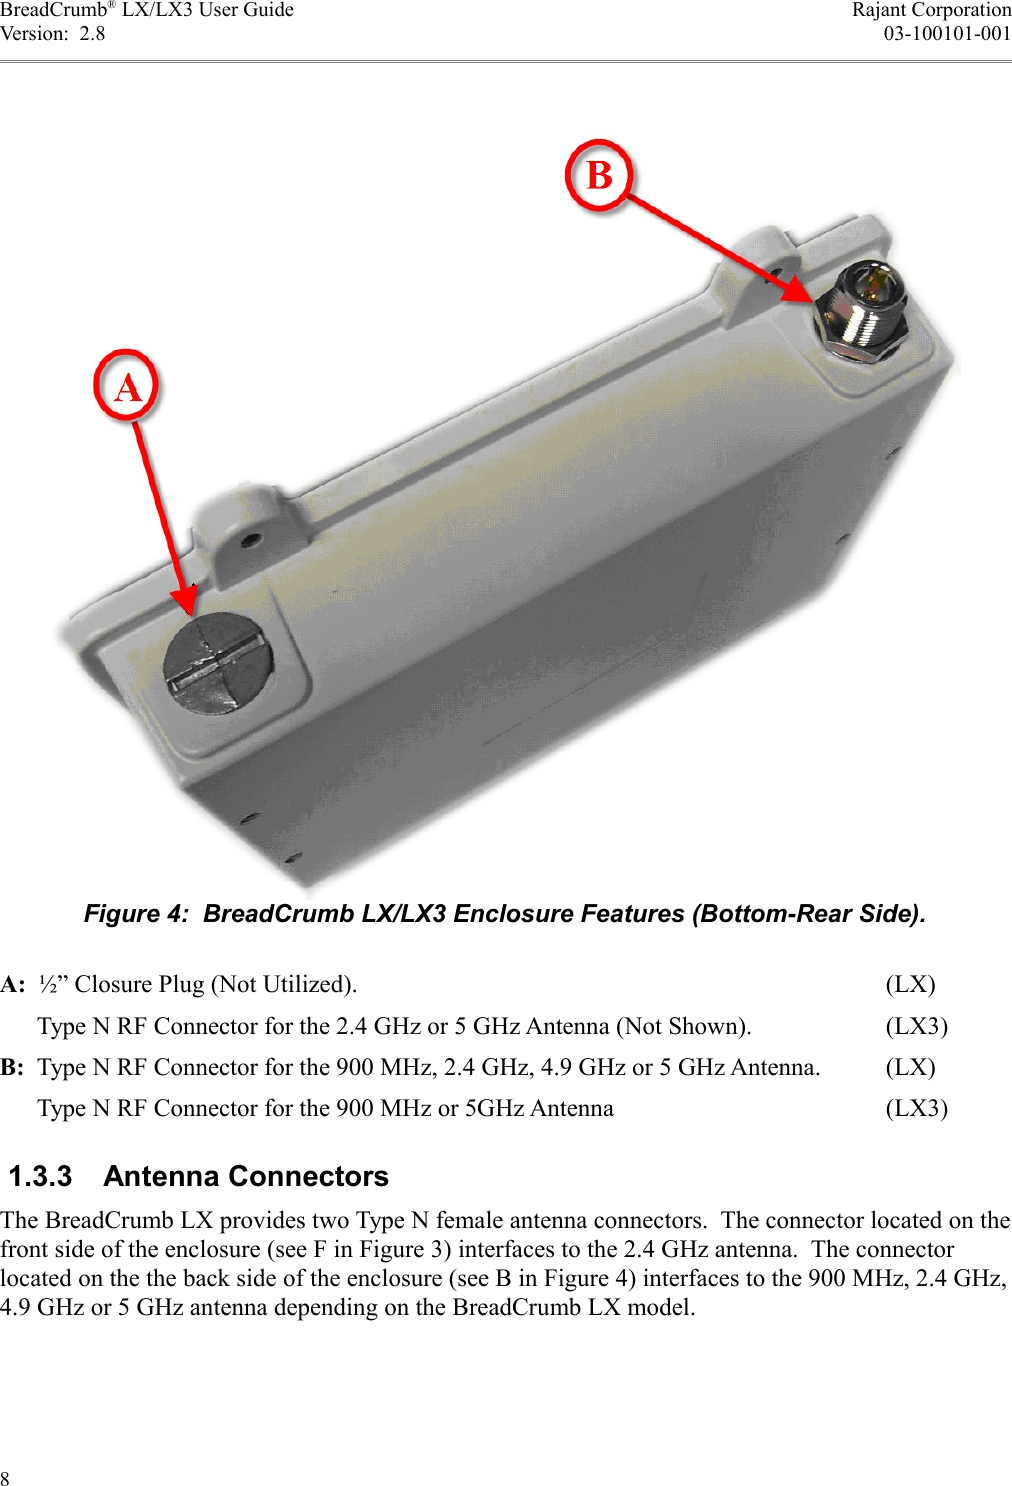 BreadCrumb® LX/LX3 User Guide Rajant CorporationVersion:  2.8 03-100101-001A:  ½” Closure Plug (Not Utilized). (LX)      Type N RF Connector for the 2.4 GHz or 5 GHz Antenna (Not Shown). (LX3)B:  Type N RF Connector for the 900 MHz, 2.4 GHz, 4.9 GHz or 5 GHz Antenna. (LX)      Type N RF Connector for the 900 MHz or 5GHz Antenna (LX3) 1.3.3  Antenna ConnectorsThe BreadCrumb LX provides two Type N female antenna connectors.  The connector located on the front side of the enclosure (see F in Figure 3) interfaces to the 2.4 GHz antenna.  The connector located on the the back side of the enclosure (see B in Figure 4) interfaces to the 900 MHz, 2.4 GHz, 4.9 GHz or 5 GHz antenna depending on the BreadCrumb LX model.8Figure 4:  BreadCrumb LX/LX3 Enclosure Features (Bottom-Rear Side).